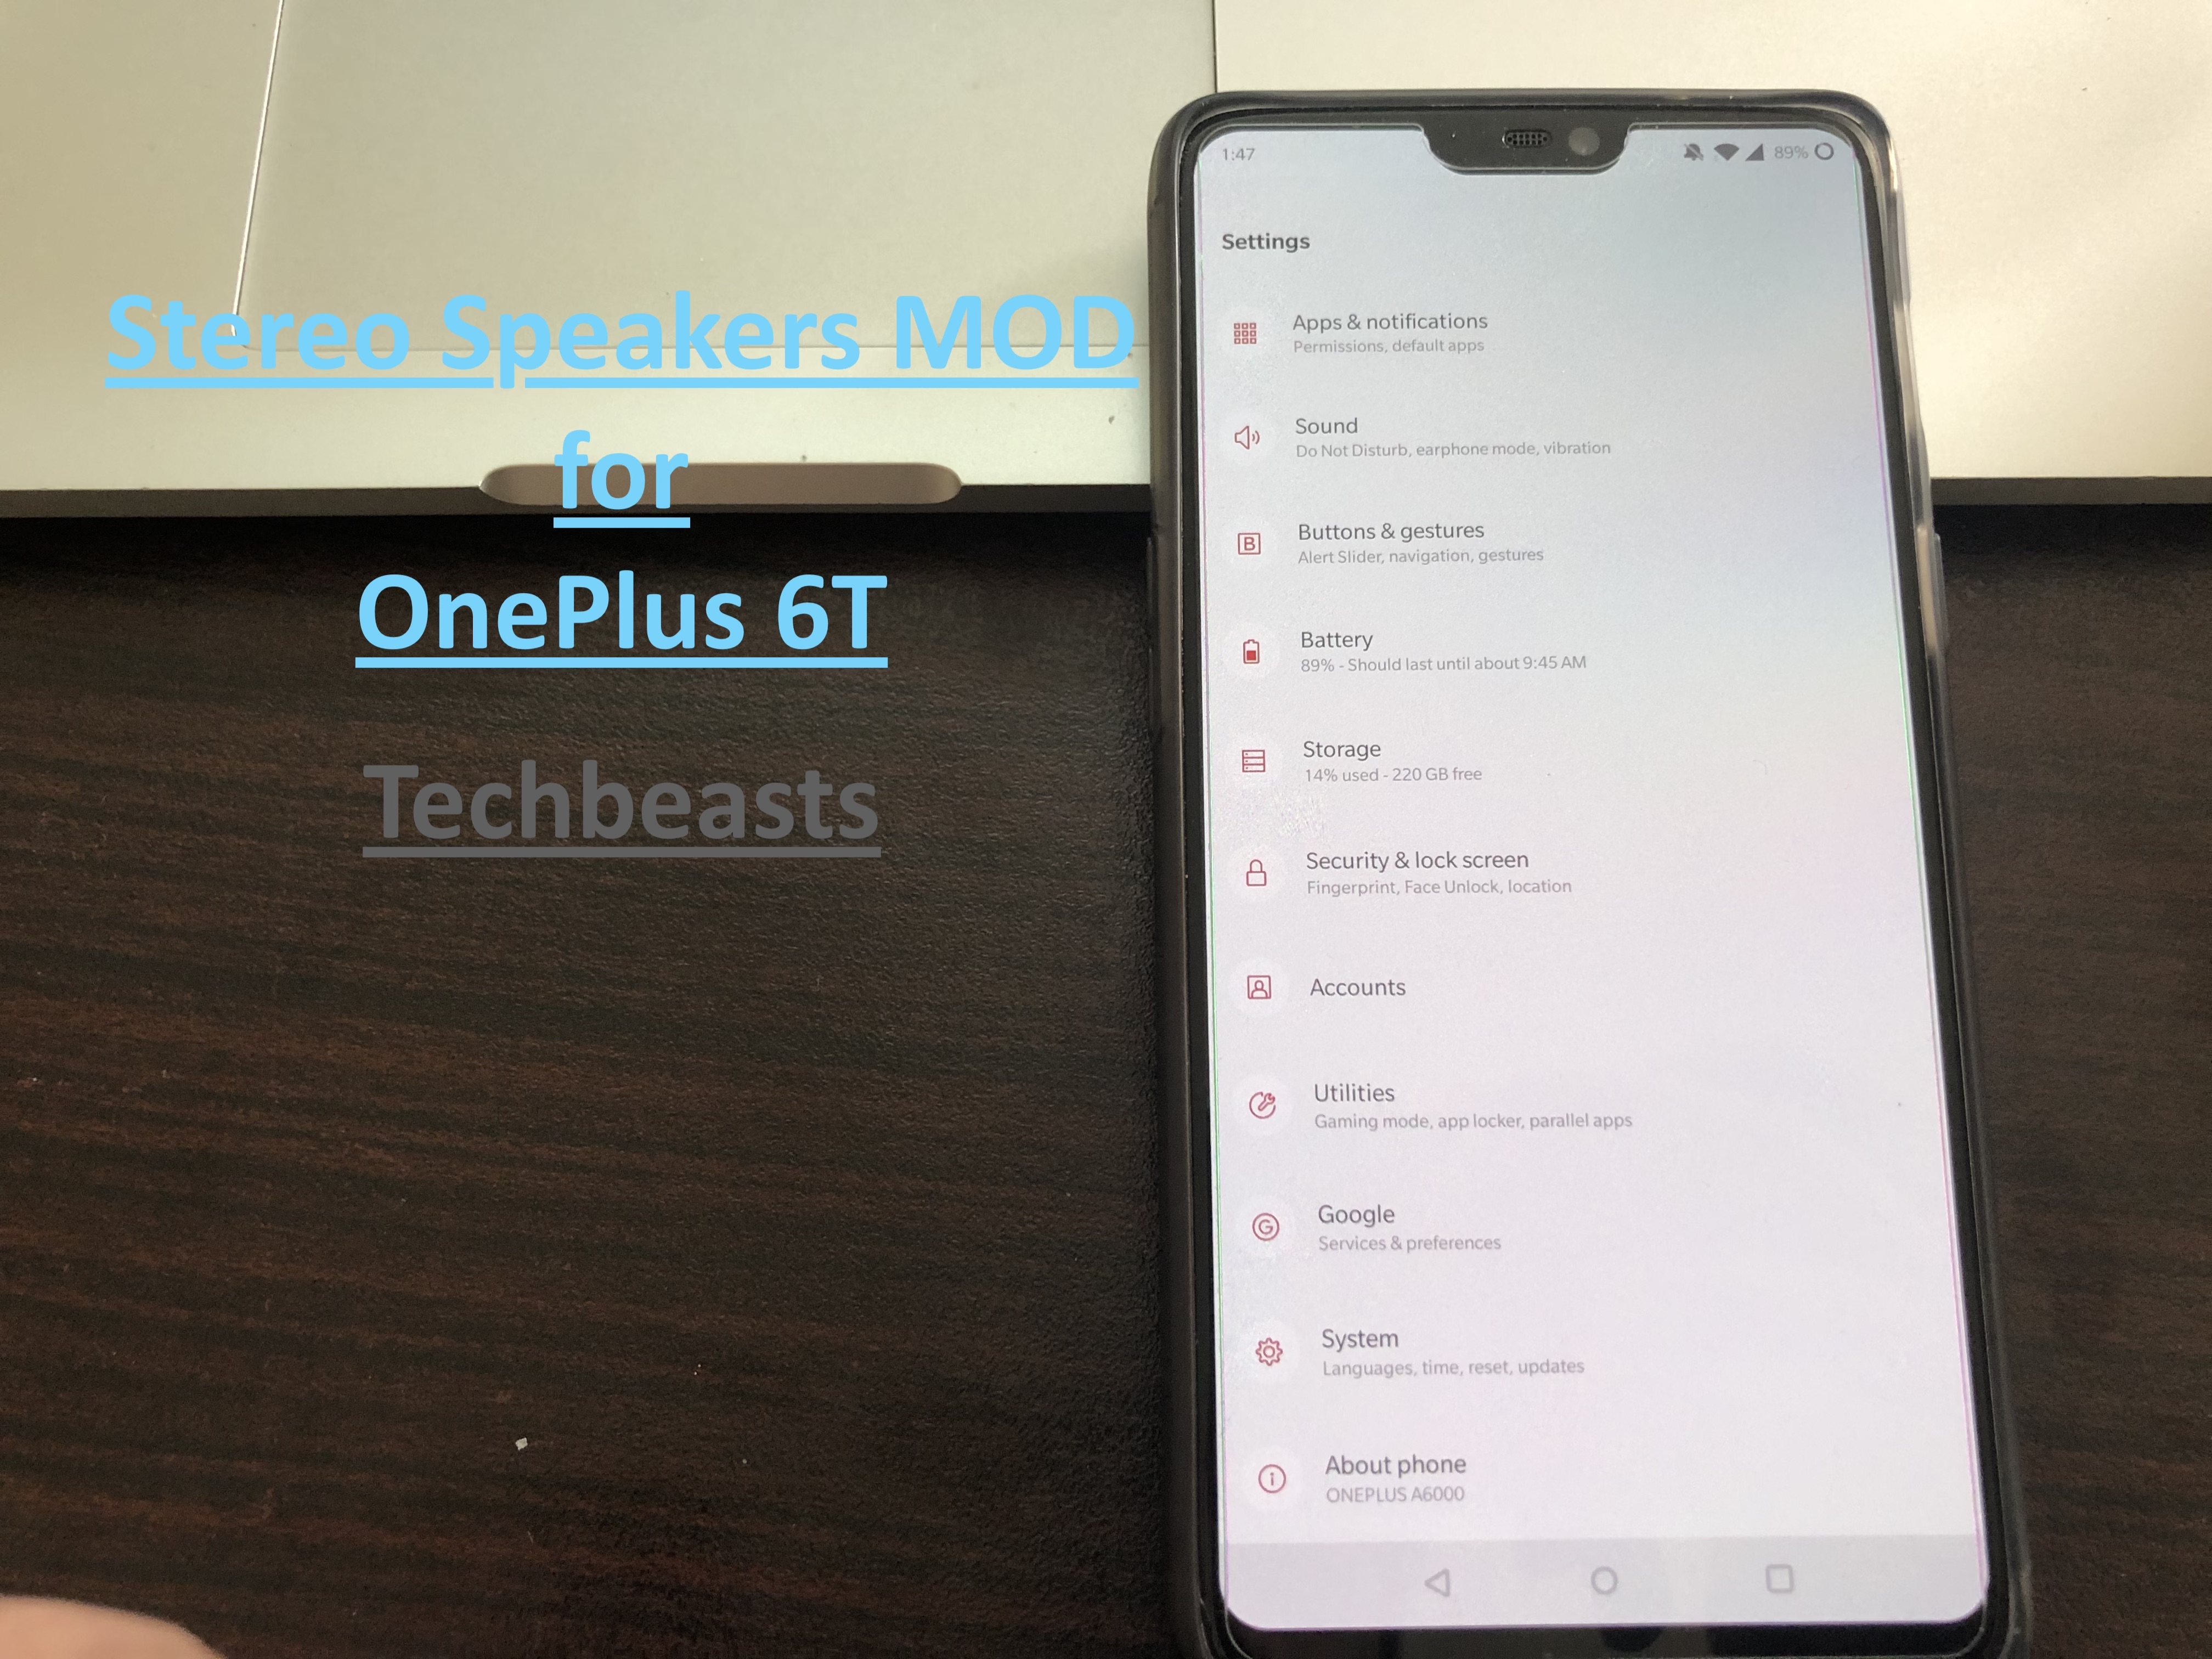 Stereo Speakers MOD on OnePlus 6T